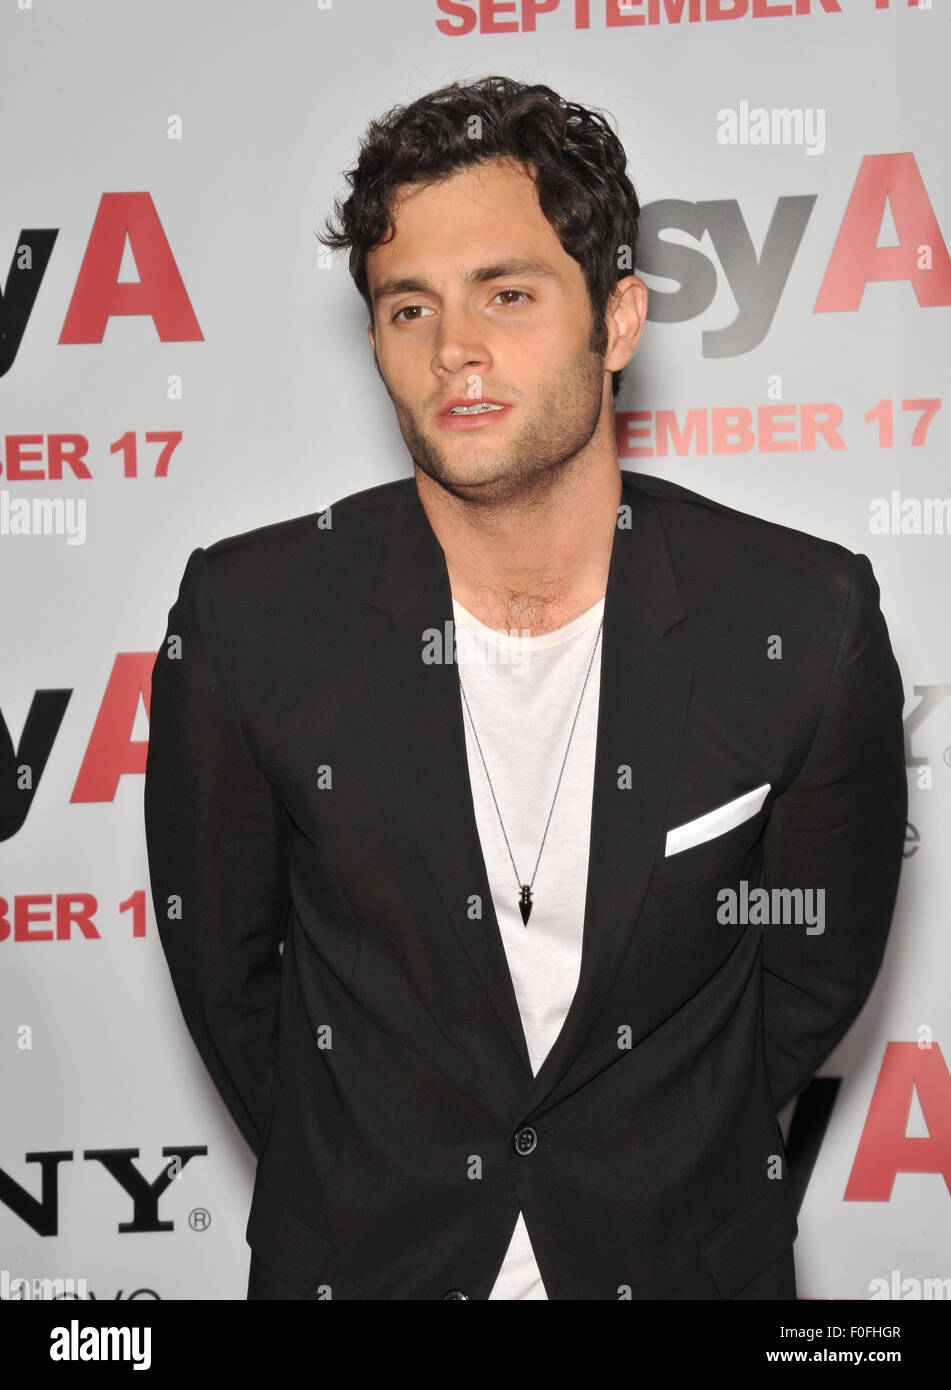 LOS ANGELES, CA - SEPTEMBER 13, 2010: Penn Badgley at the premiere of his new movie 'Easy A' at Grauman's Chinese Theatre, Hollywood. Stock Photo